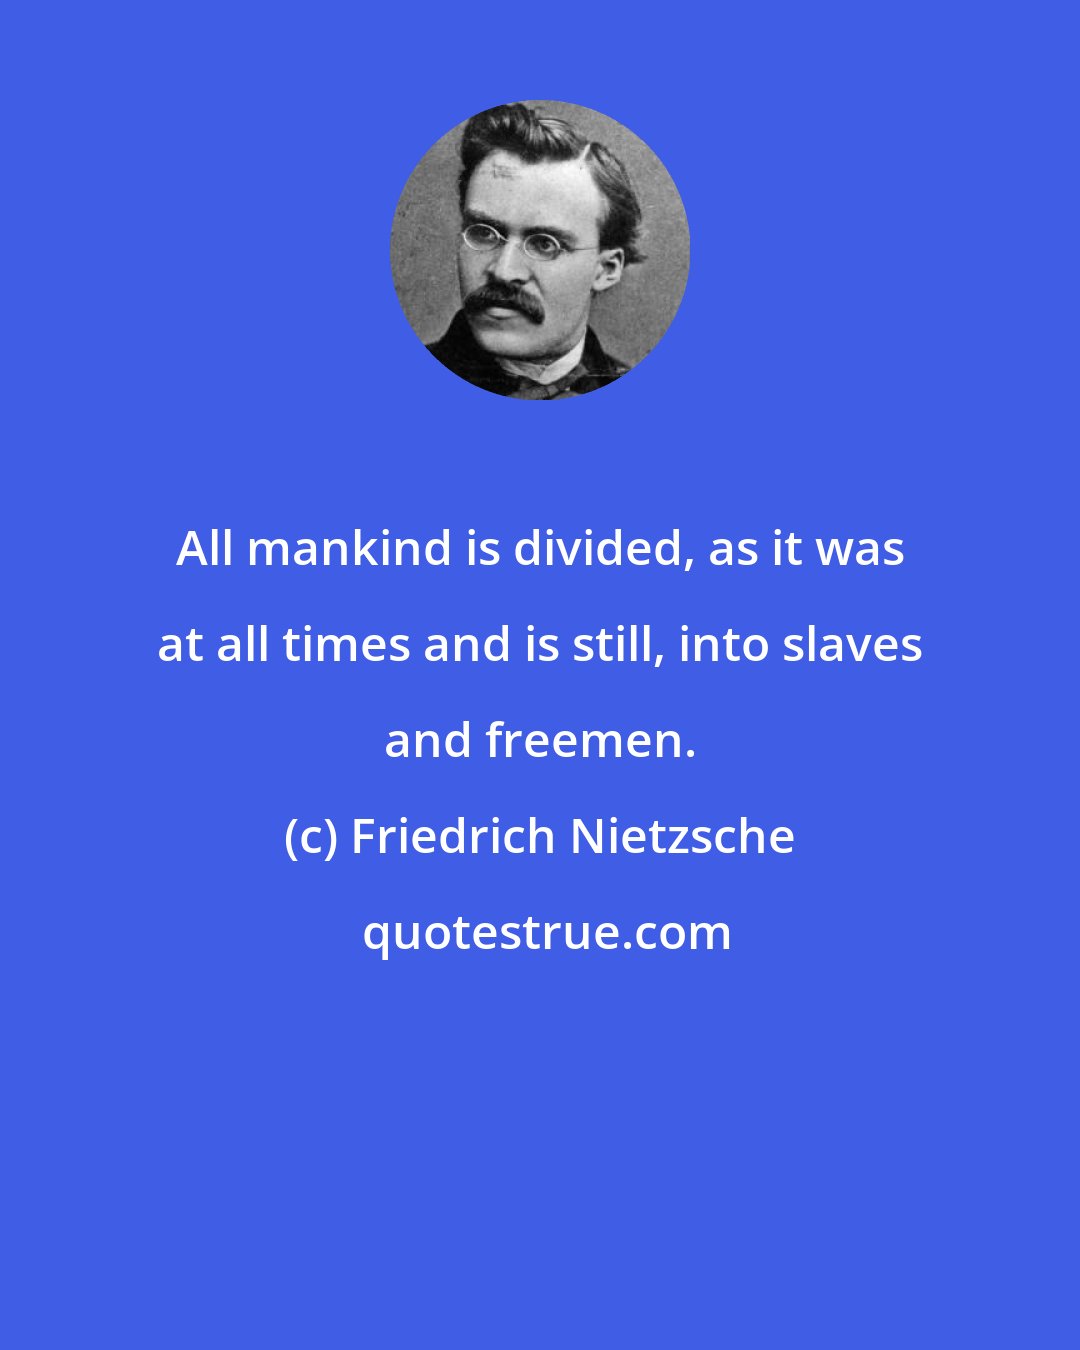 Friedrich Nietzsche: All mankind is divided, as it was at all times and is still, into slaves and freemen.